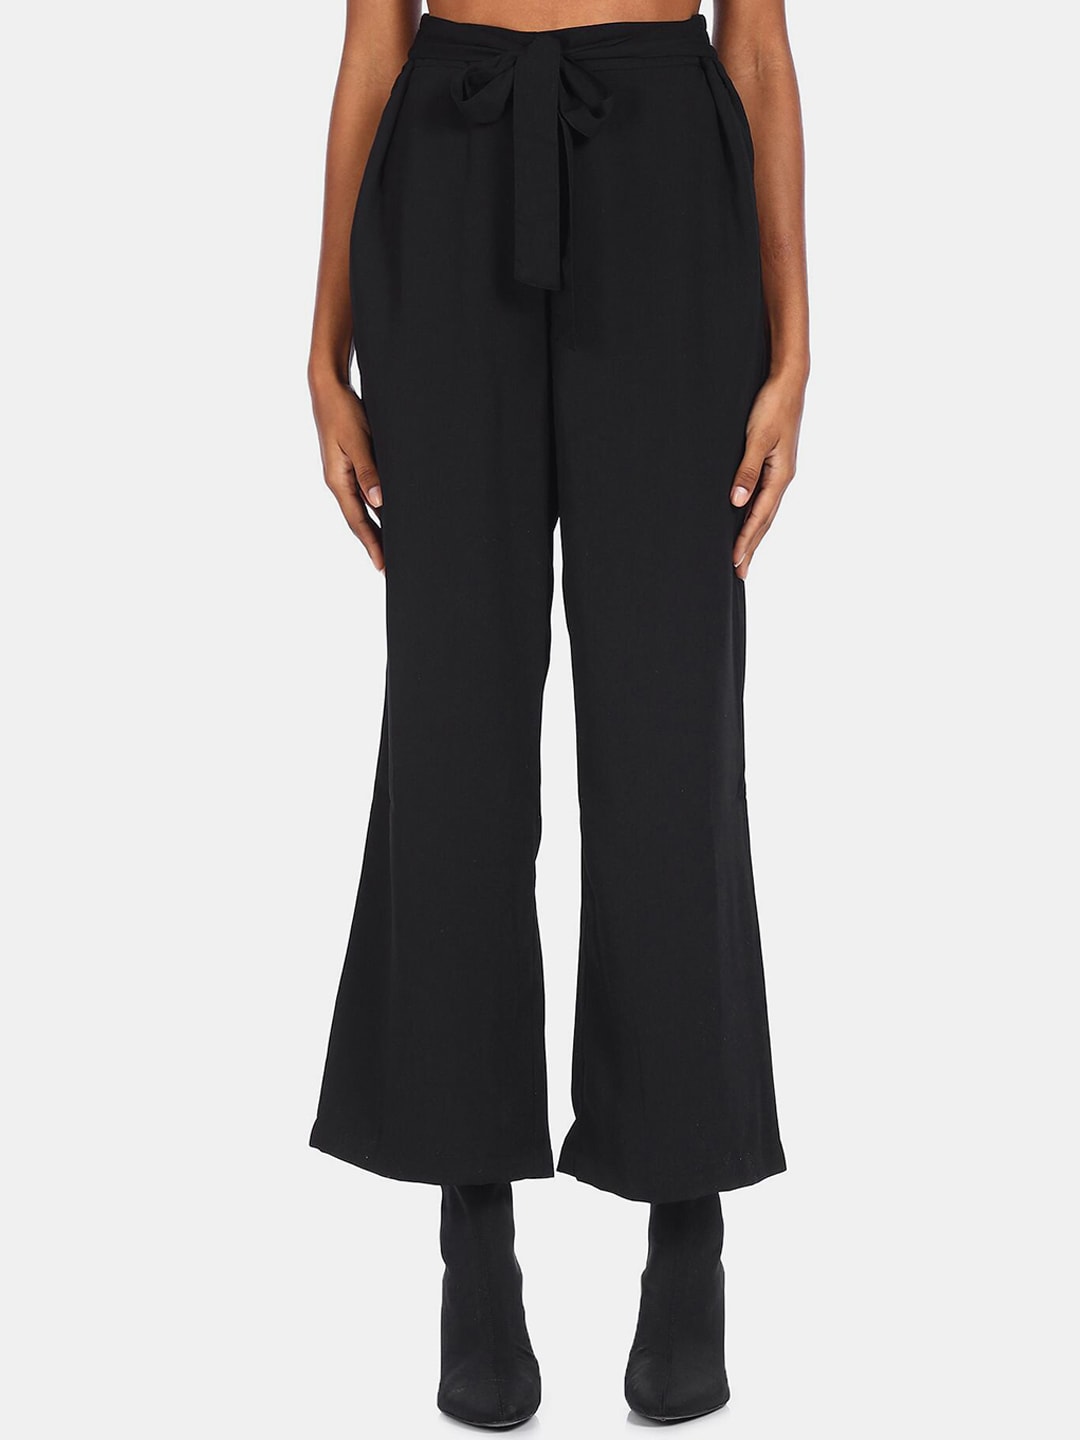 Flying Machine Women Black Trousers Price in India